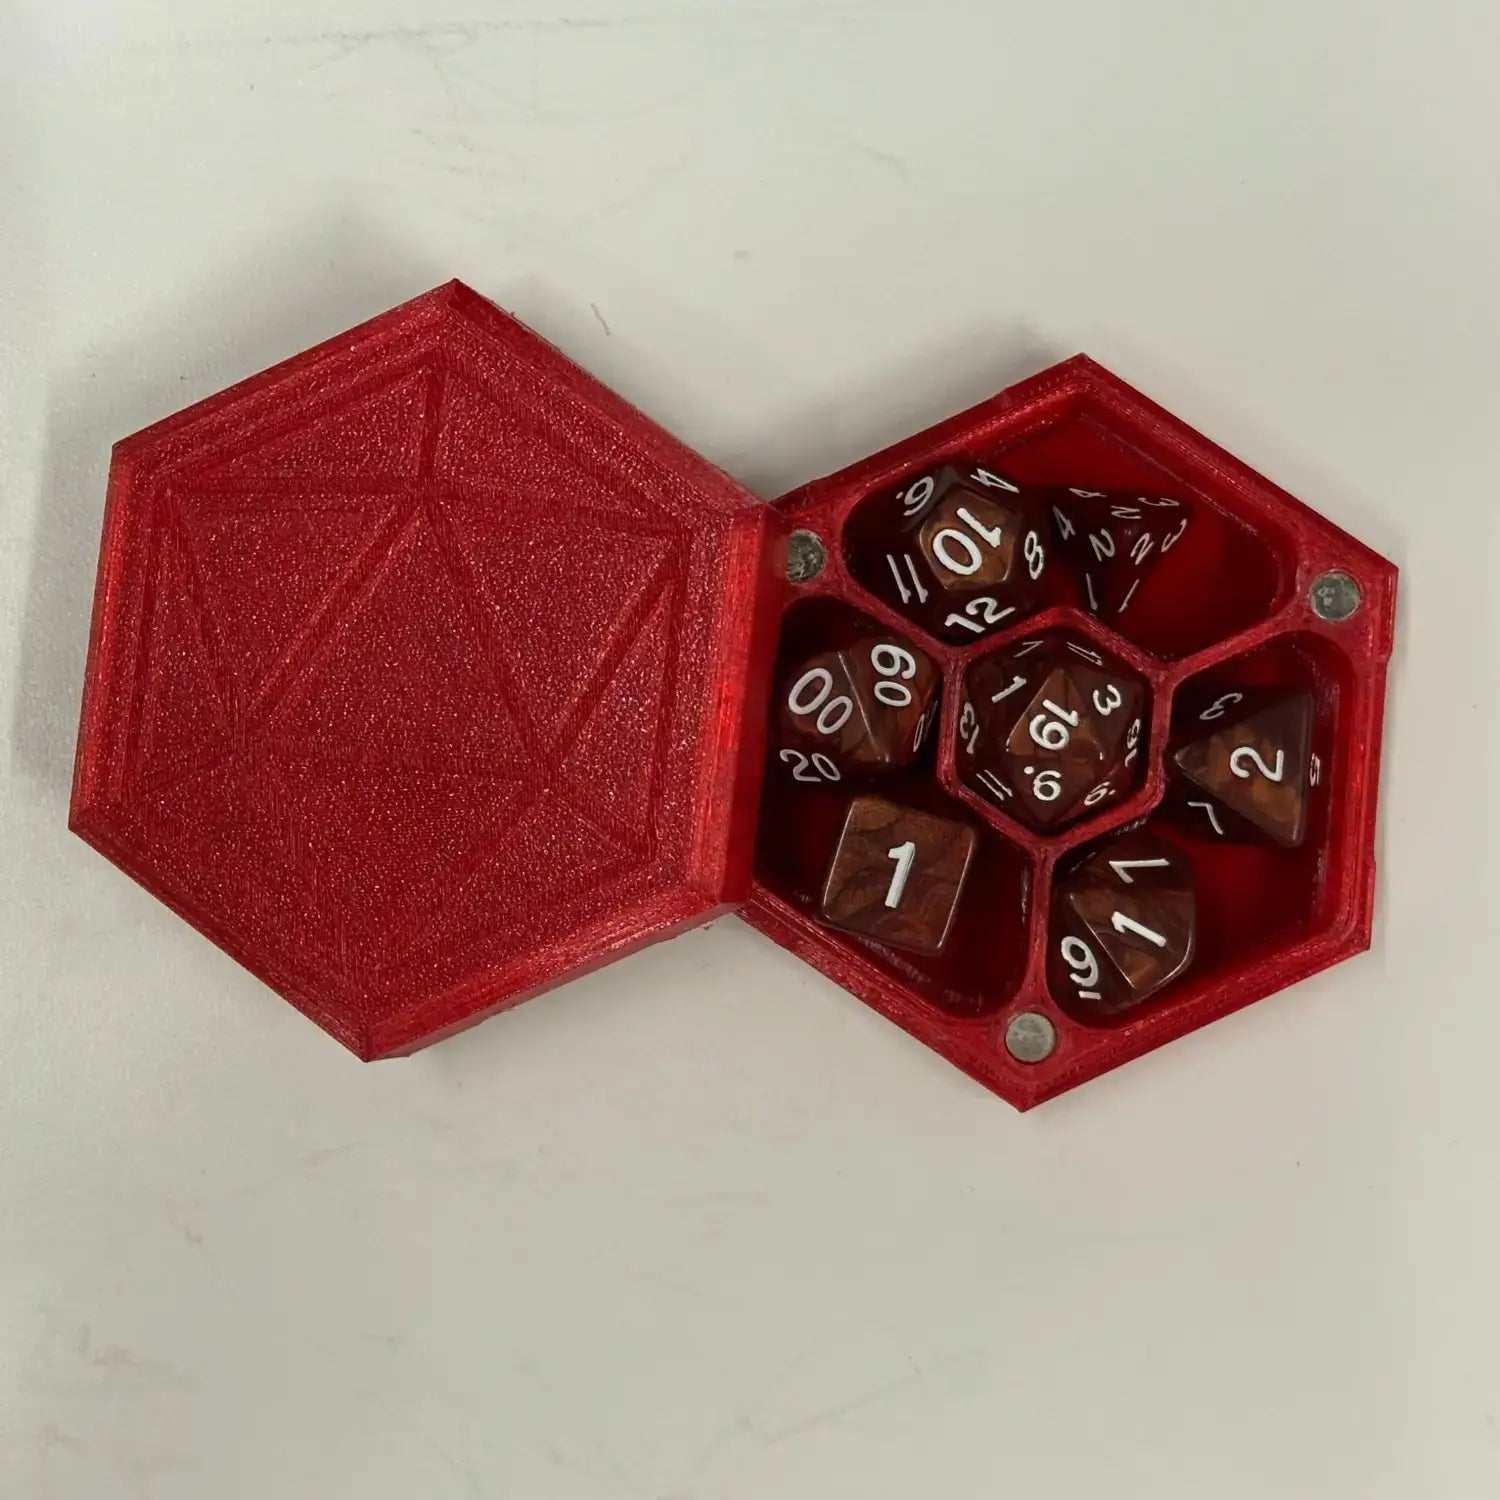 Felt lined Dice Box for DnD or table top games - Red Case